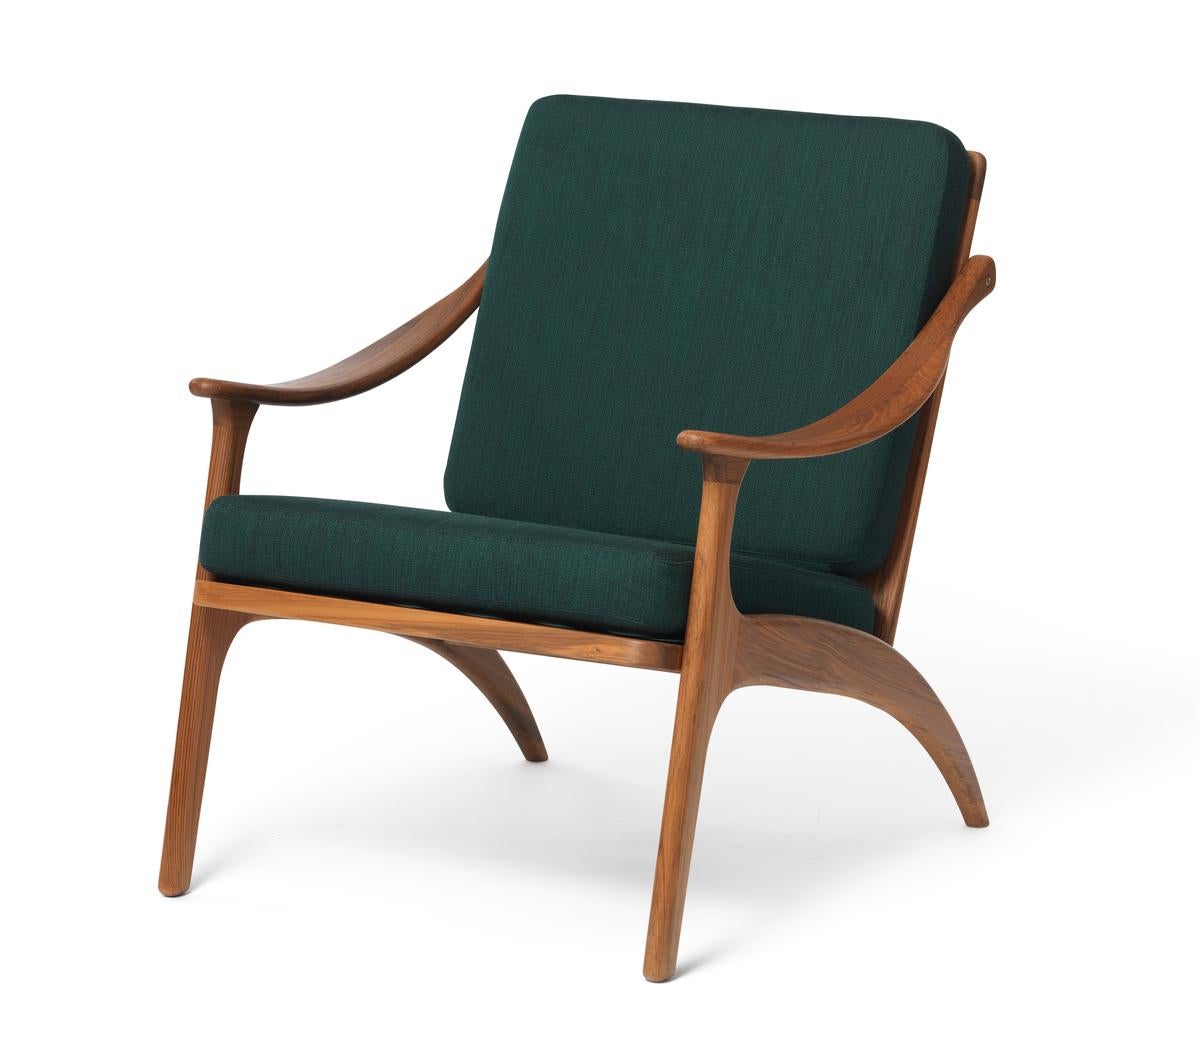 Lean back lounge chair teak forest green by Warm Nordic
Dimensions: D68 x W78 x H 78 cm
Material: Solid Teak, Foam, Textile upholstery
Weight: 9 kg
Also available in different colours, materials and finishes. 

Lean Back is an elegant,